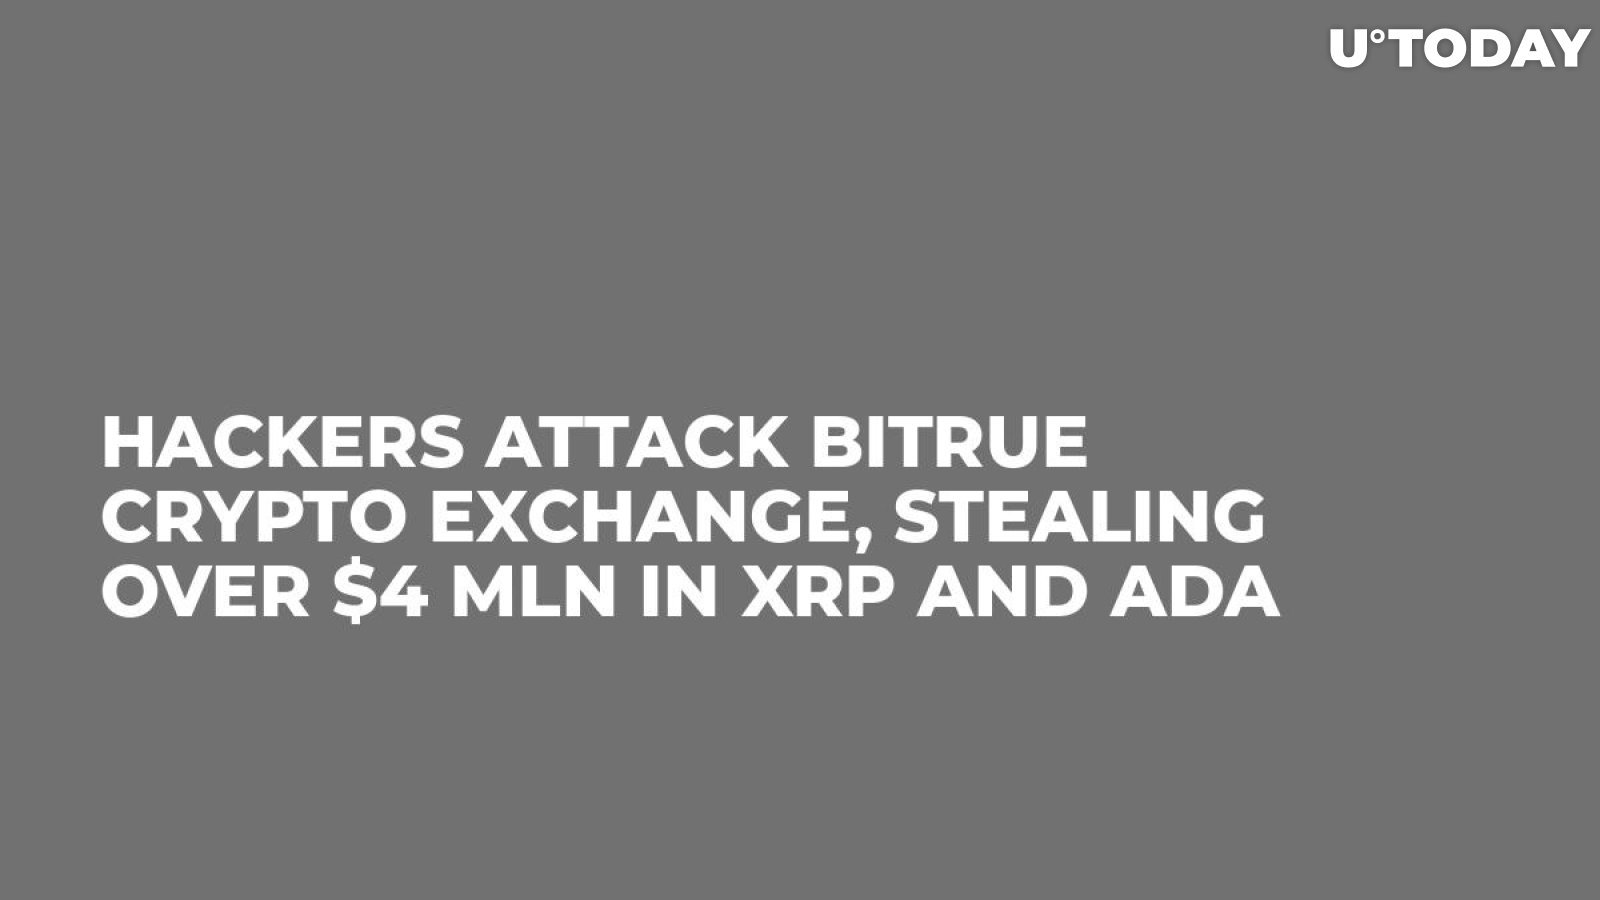 Hackers Attack Bitrue Crypto Exchange, Stealing Over $4 Mln in XRP and ADA